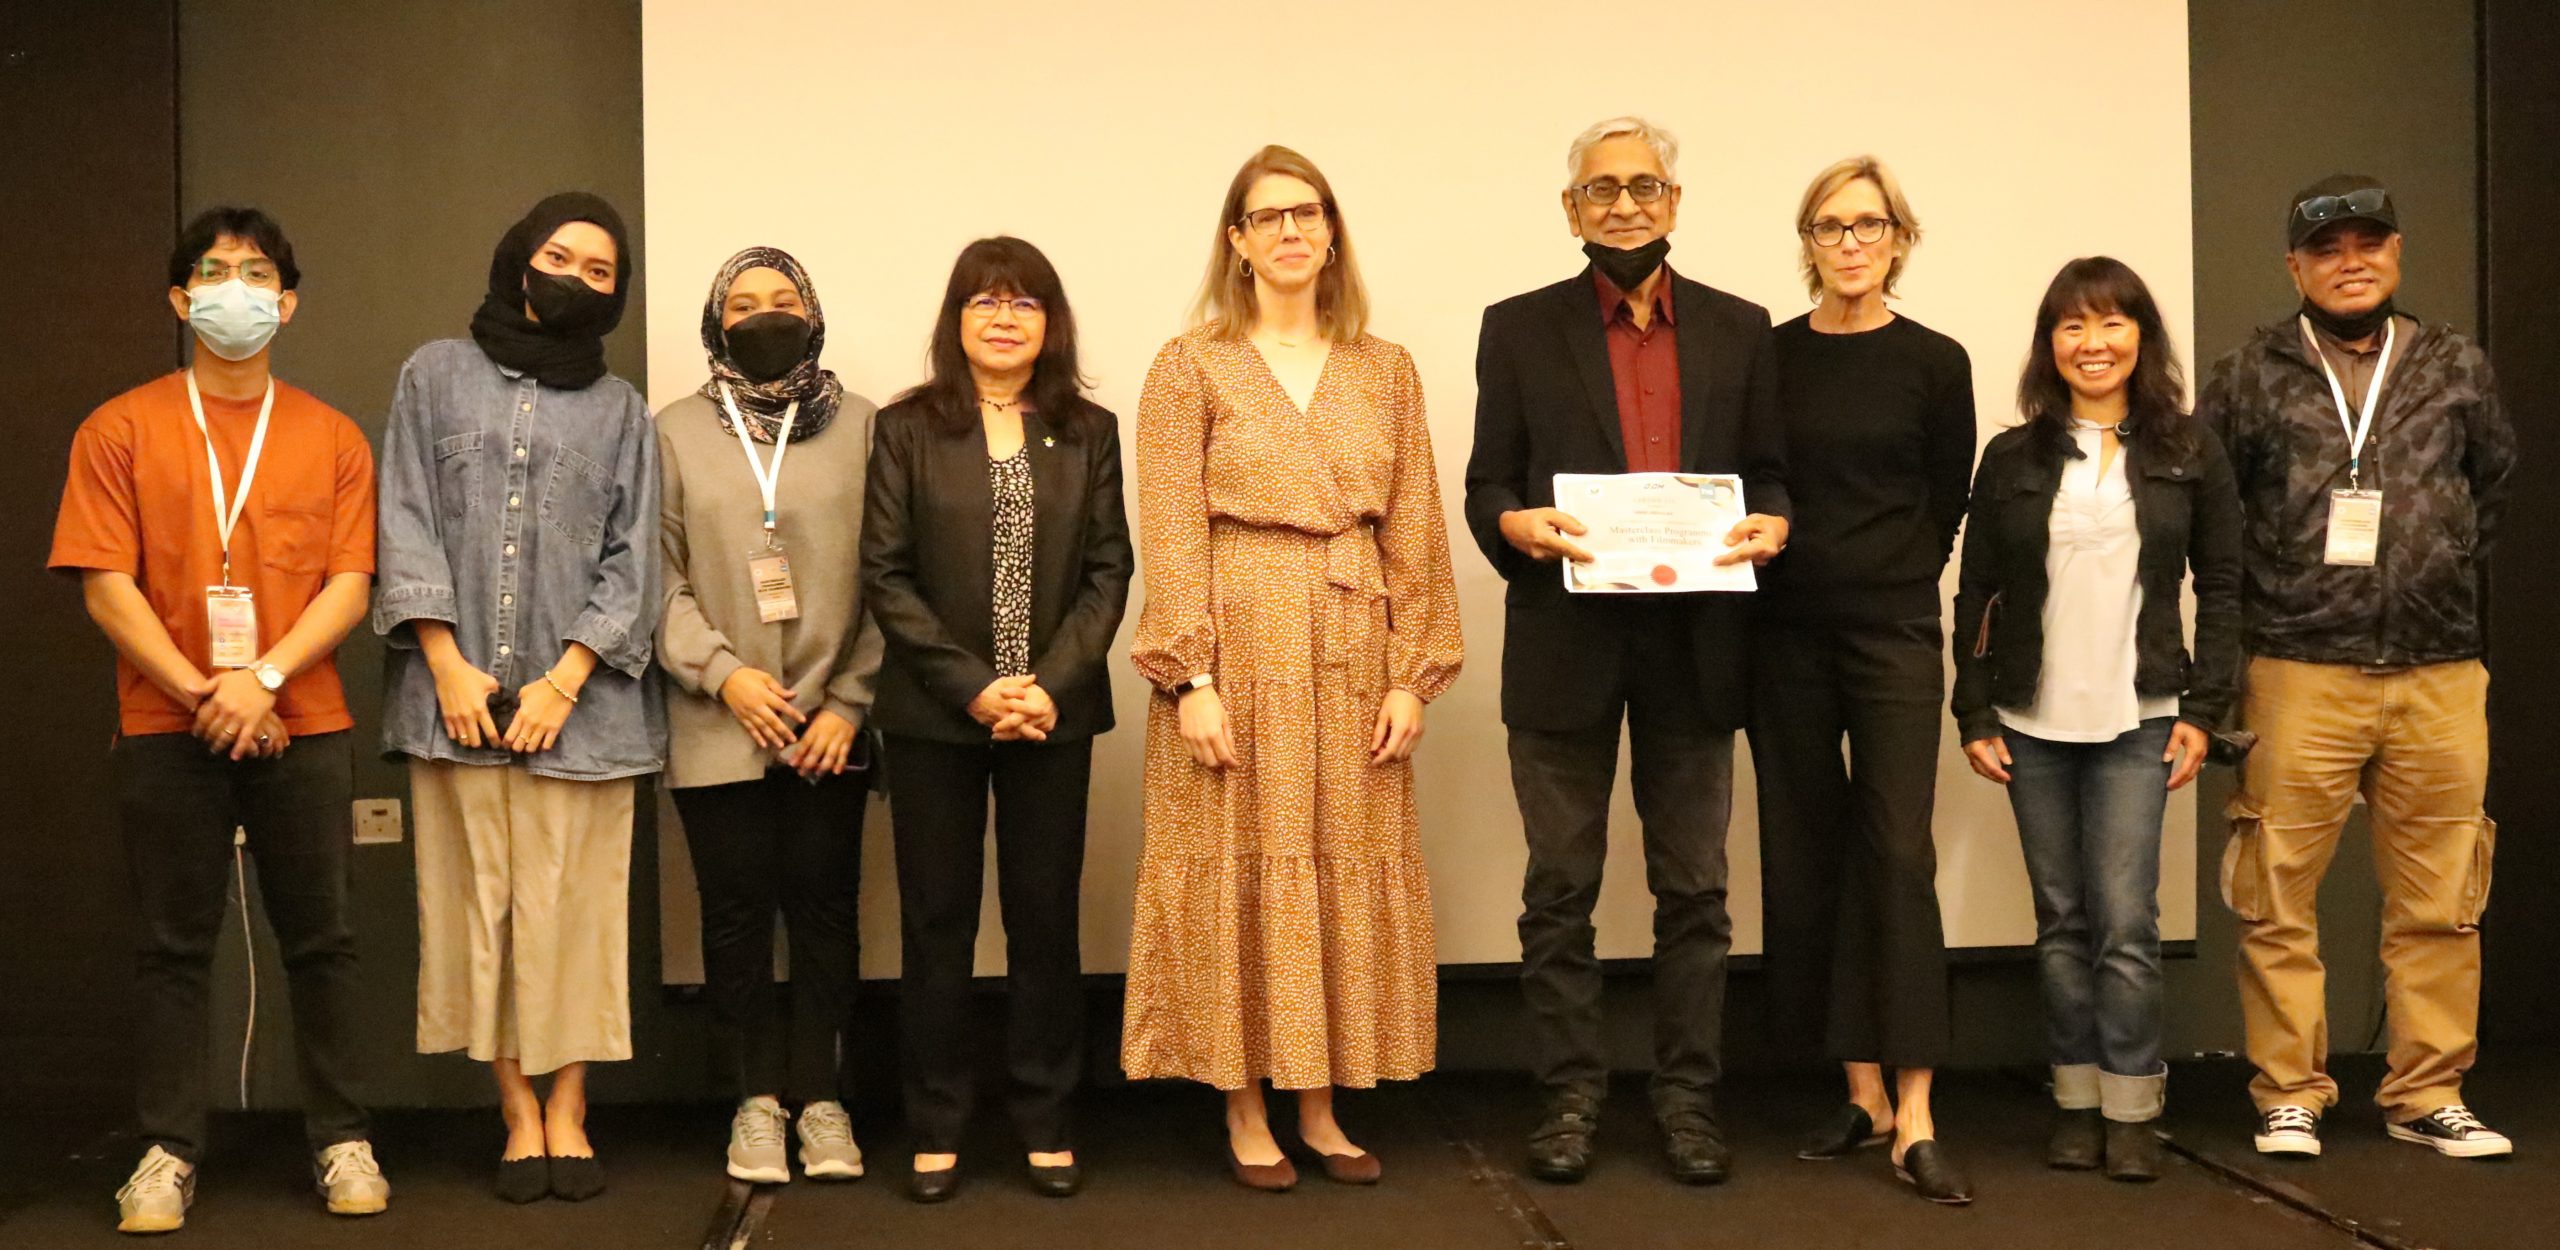 Certificate presentation at the Masterclass Program with Filmmakers seen: The organisers Lelia Sim Ah Hua, CEO of AZAM Sarawak, Ms. Katherine Diop, Cultural Affairs Officer of the United States Embassy Kuala Lumpur and Mr Jamal Abdullah, Head of Creative Content & Special Project of Sarawak Media Group (SMG) and the team.